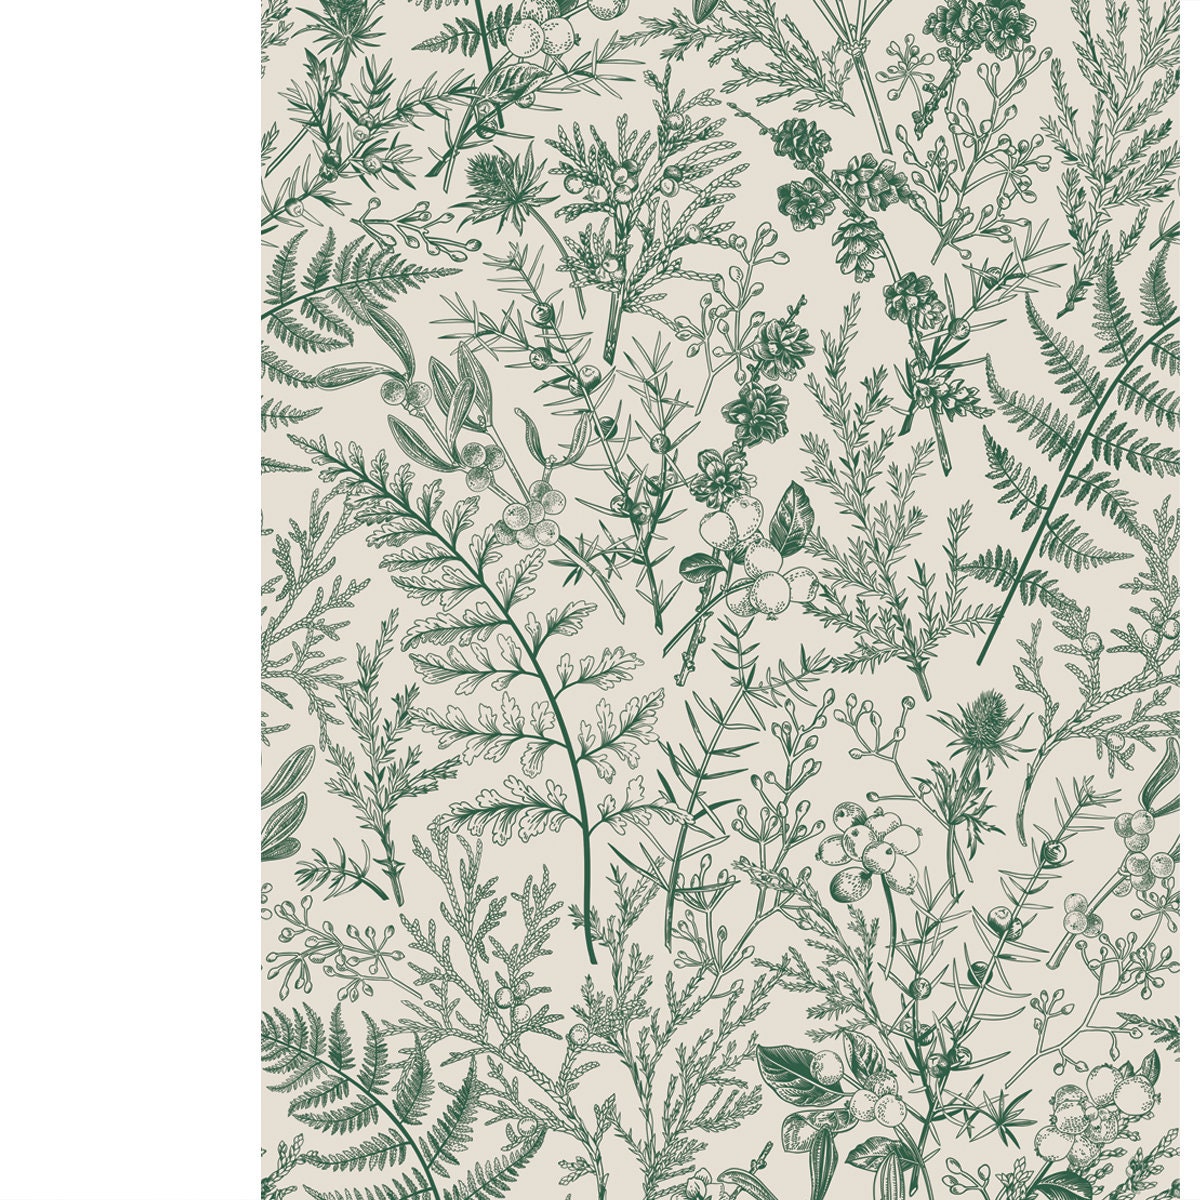 Botanical Seamless Hand-Drawn Pattern with Coniferous Branches, Plants and Berries Wallpaper Bedroom Mural